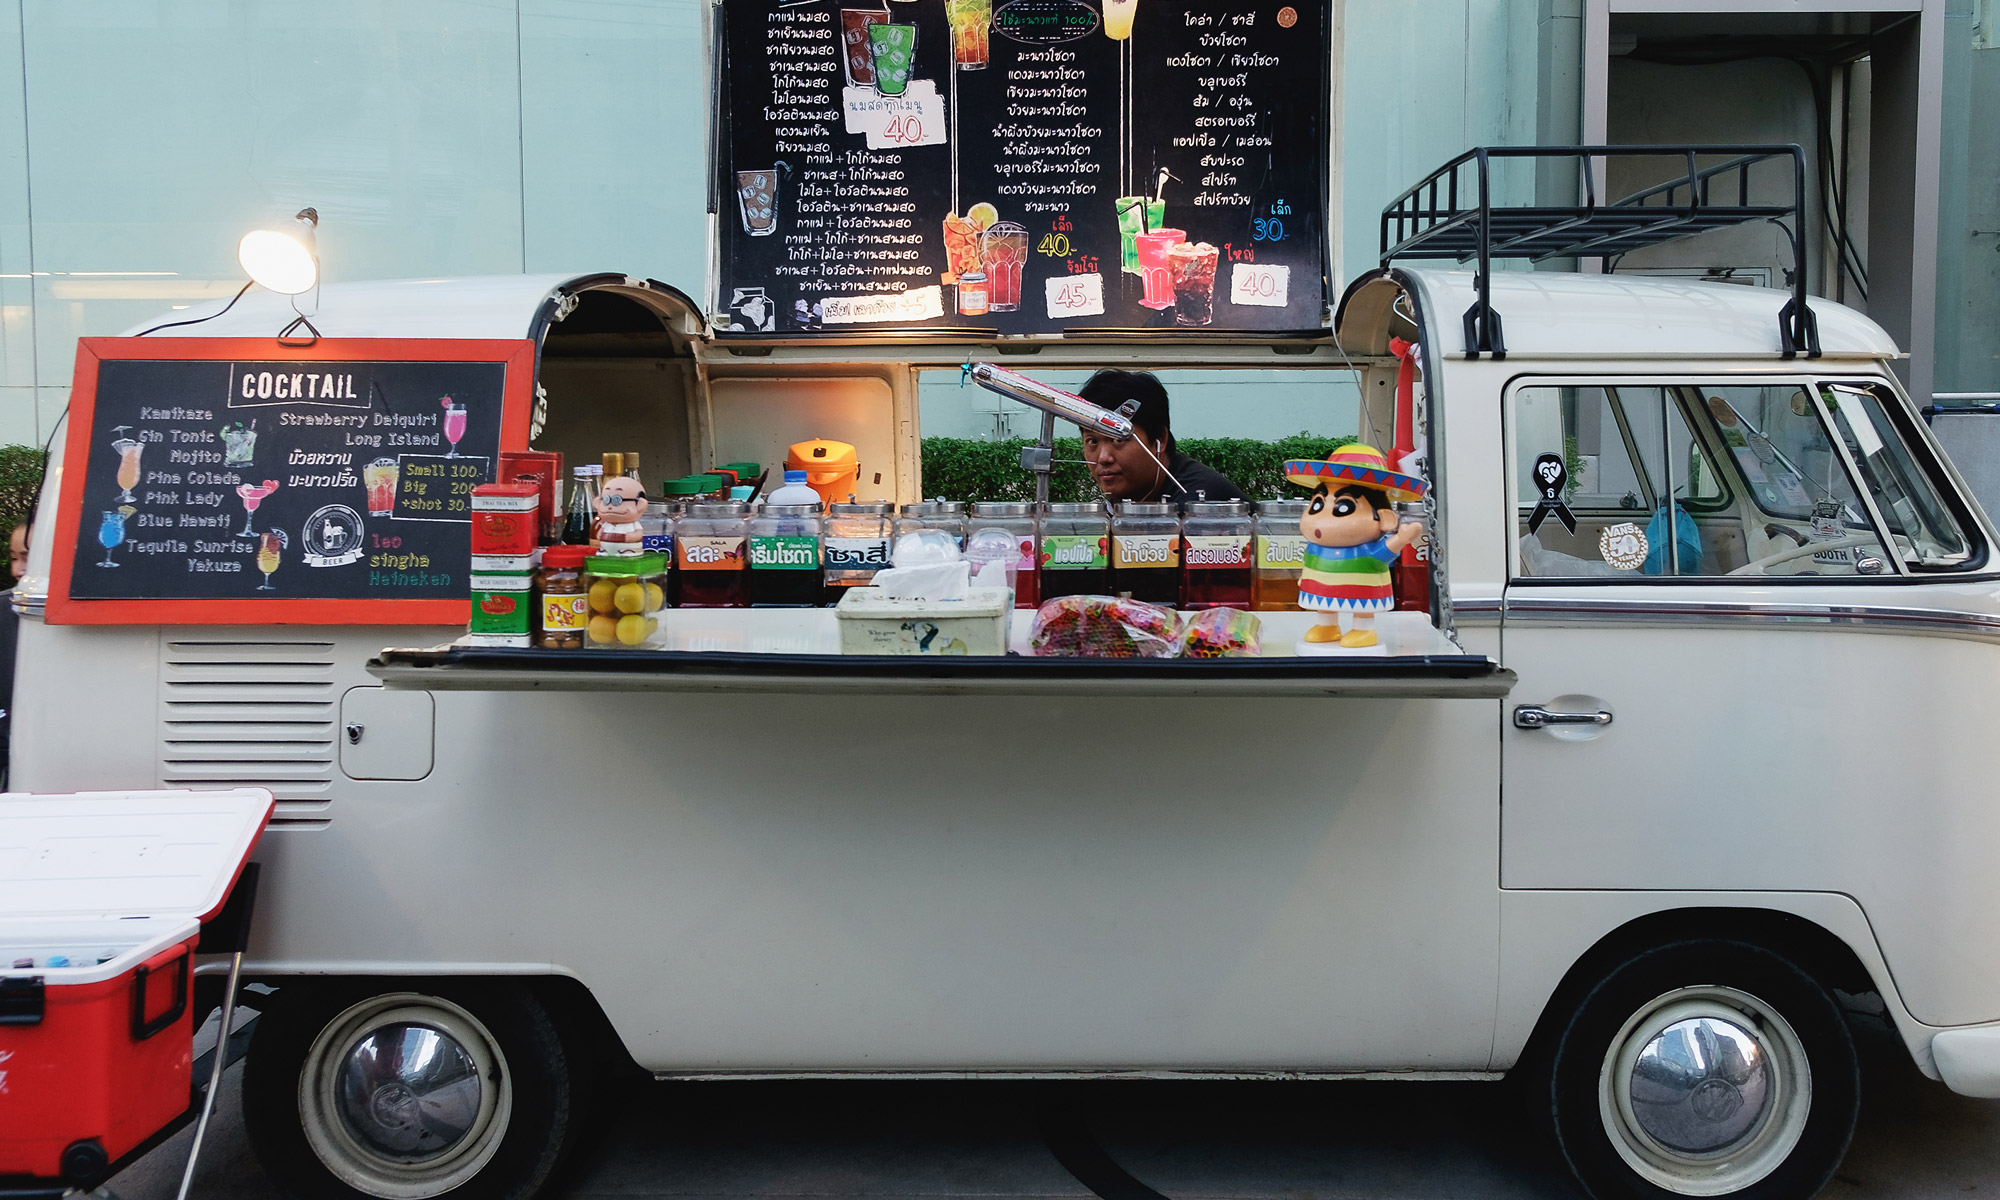 Wedding How To: Add Food Trucks to Your Big Day